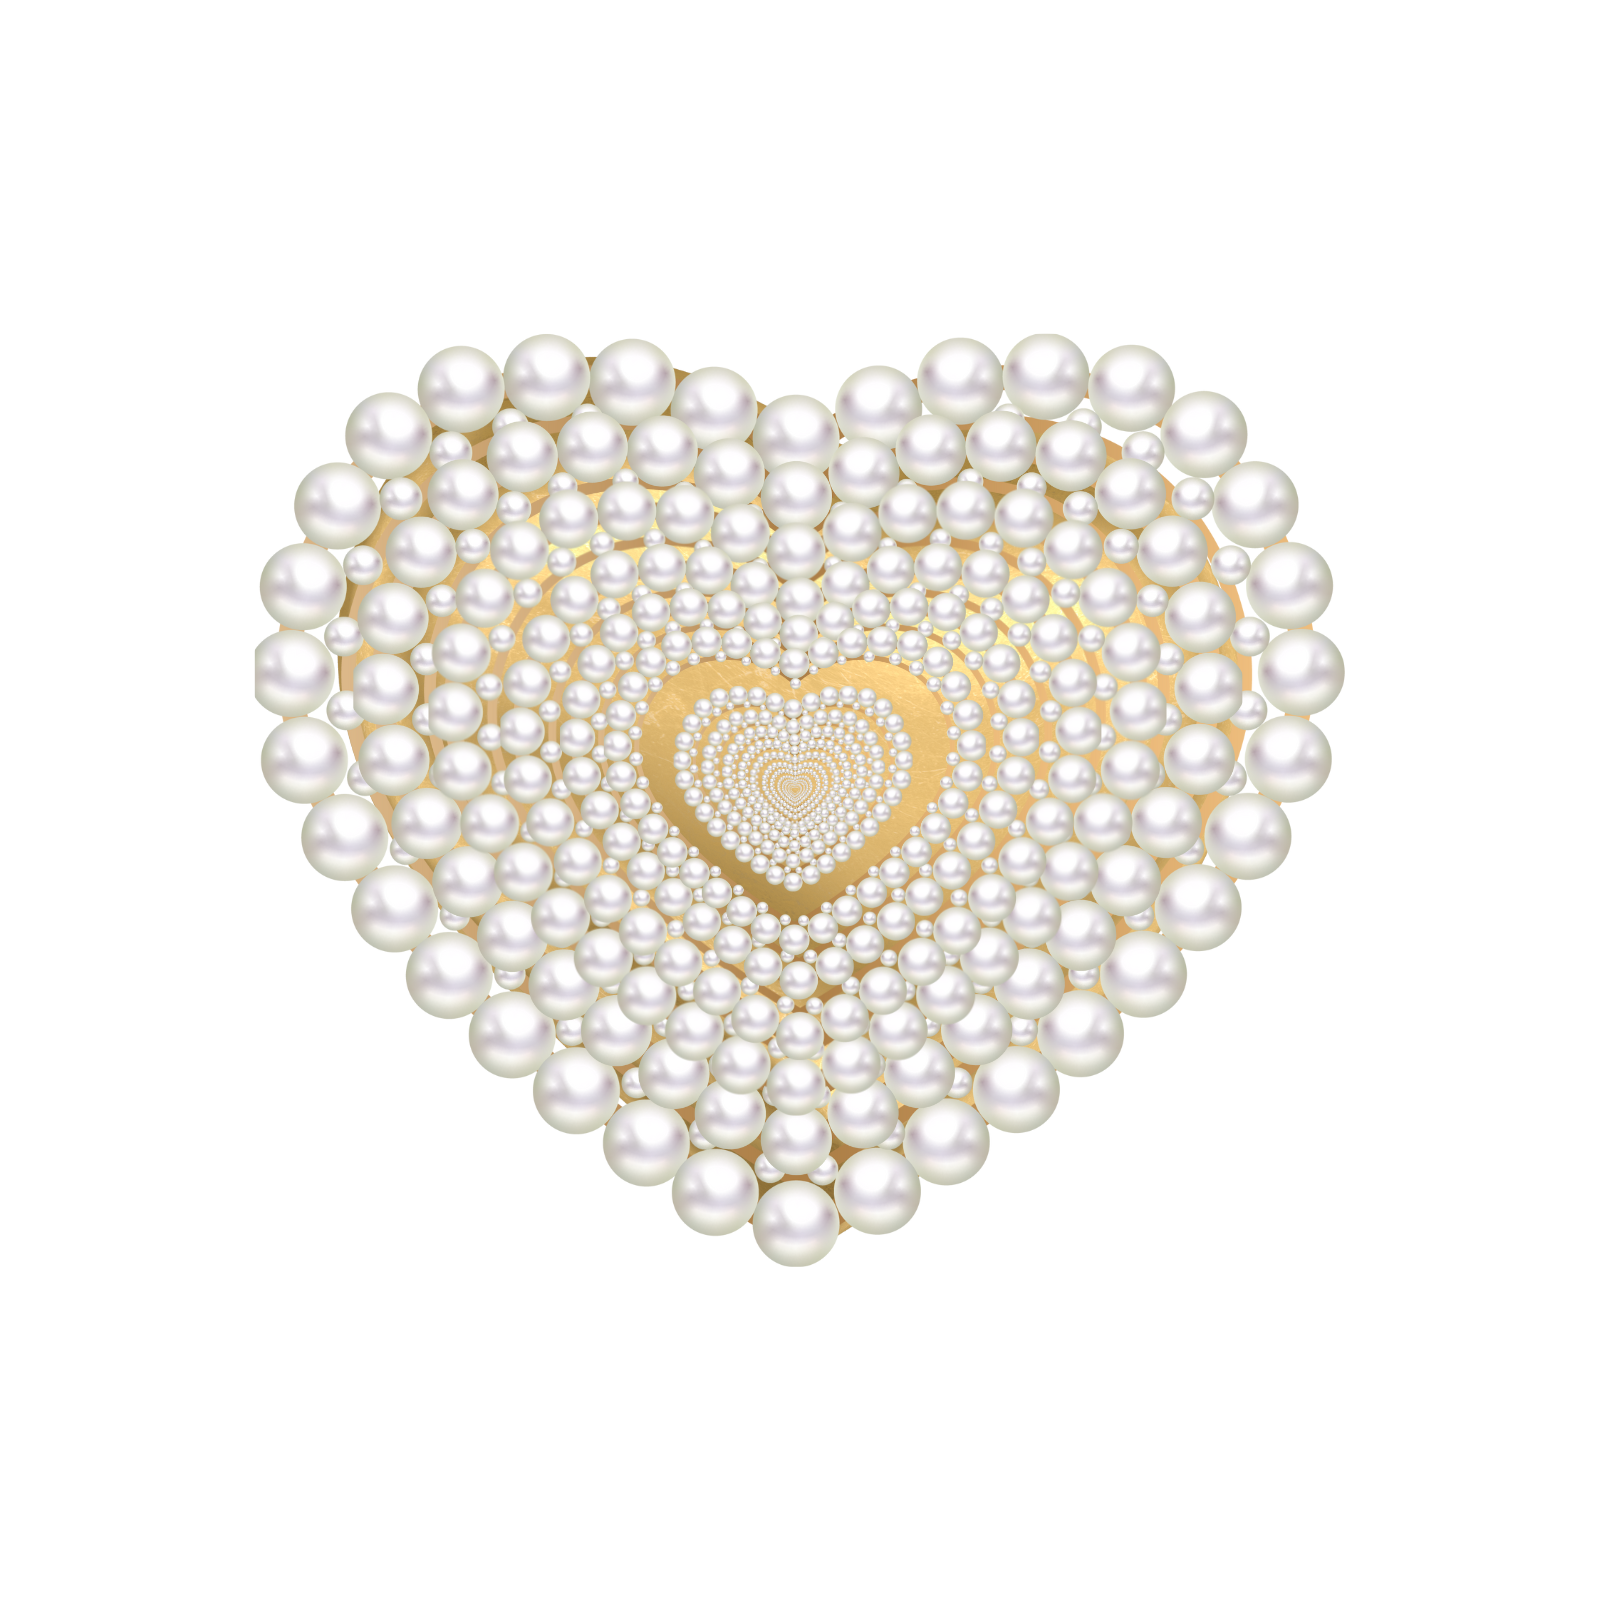 Pearls of Passion: Celebrating Love with the Incomparable Gift of Pearls on Valentine's Day